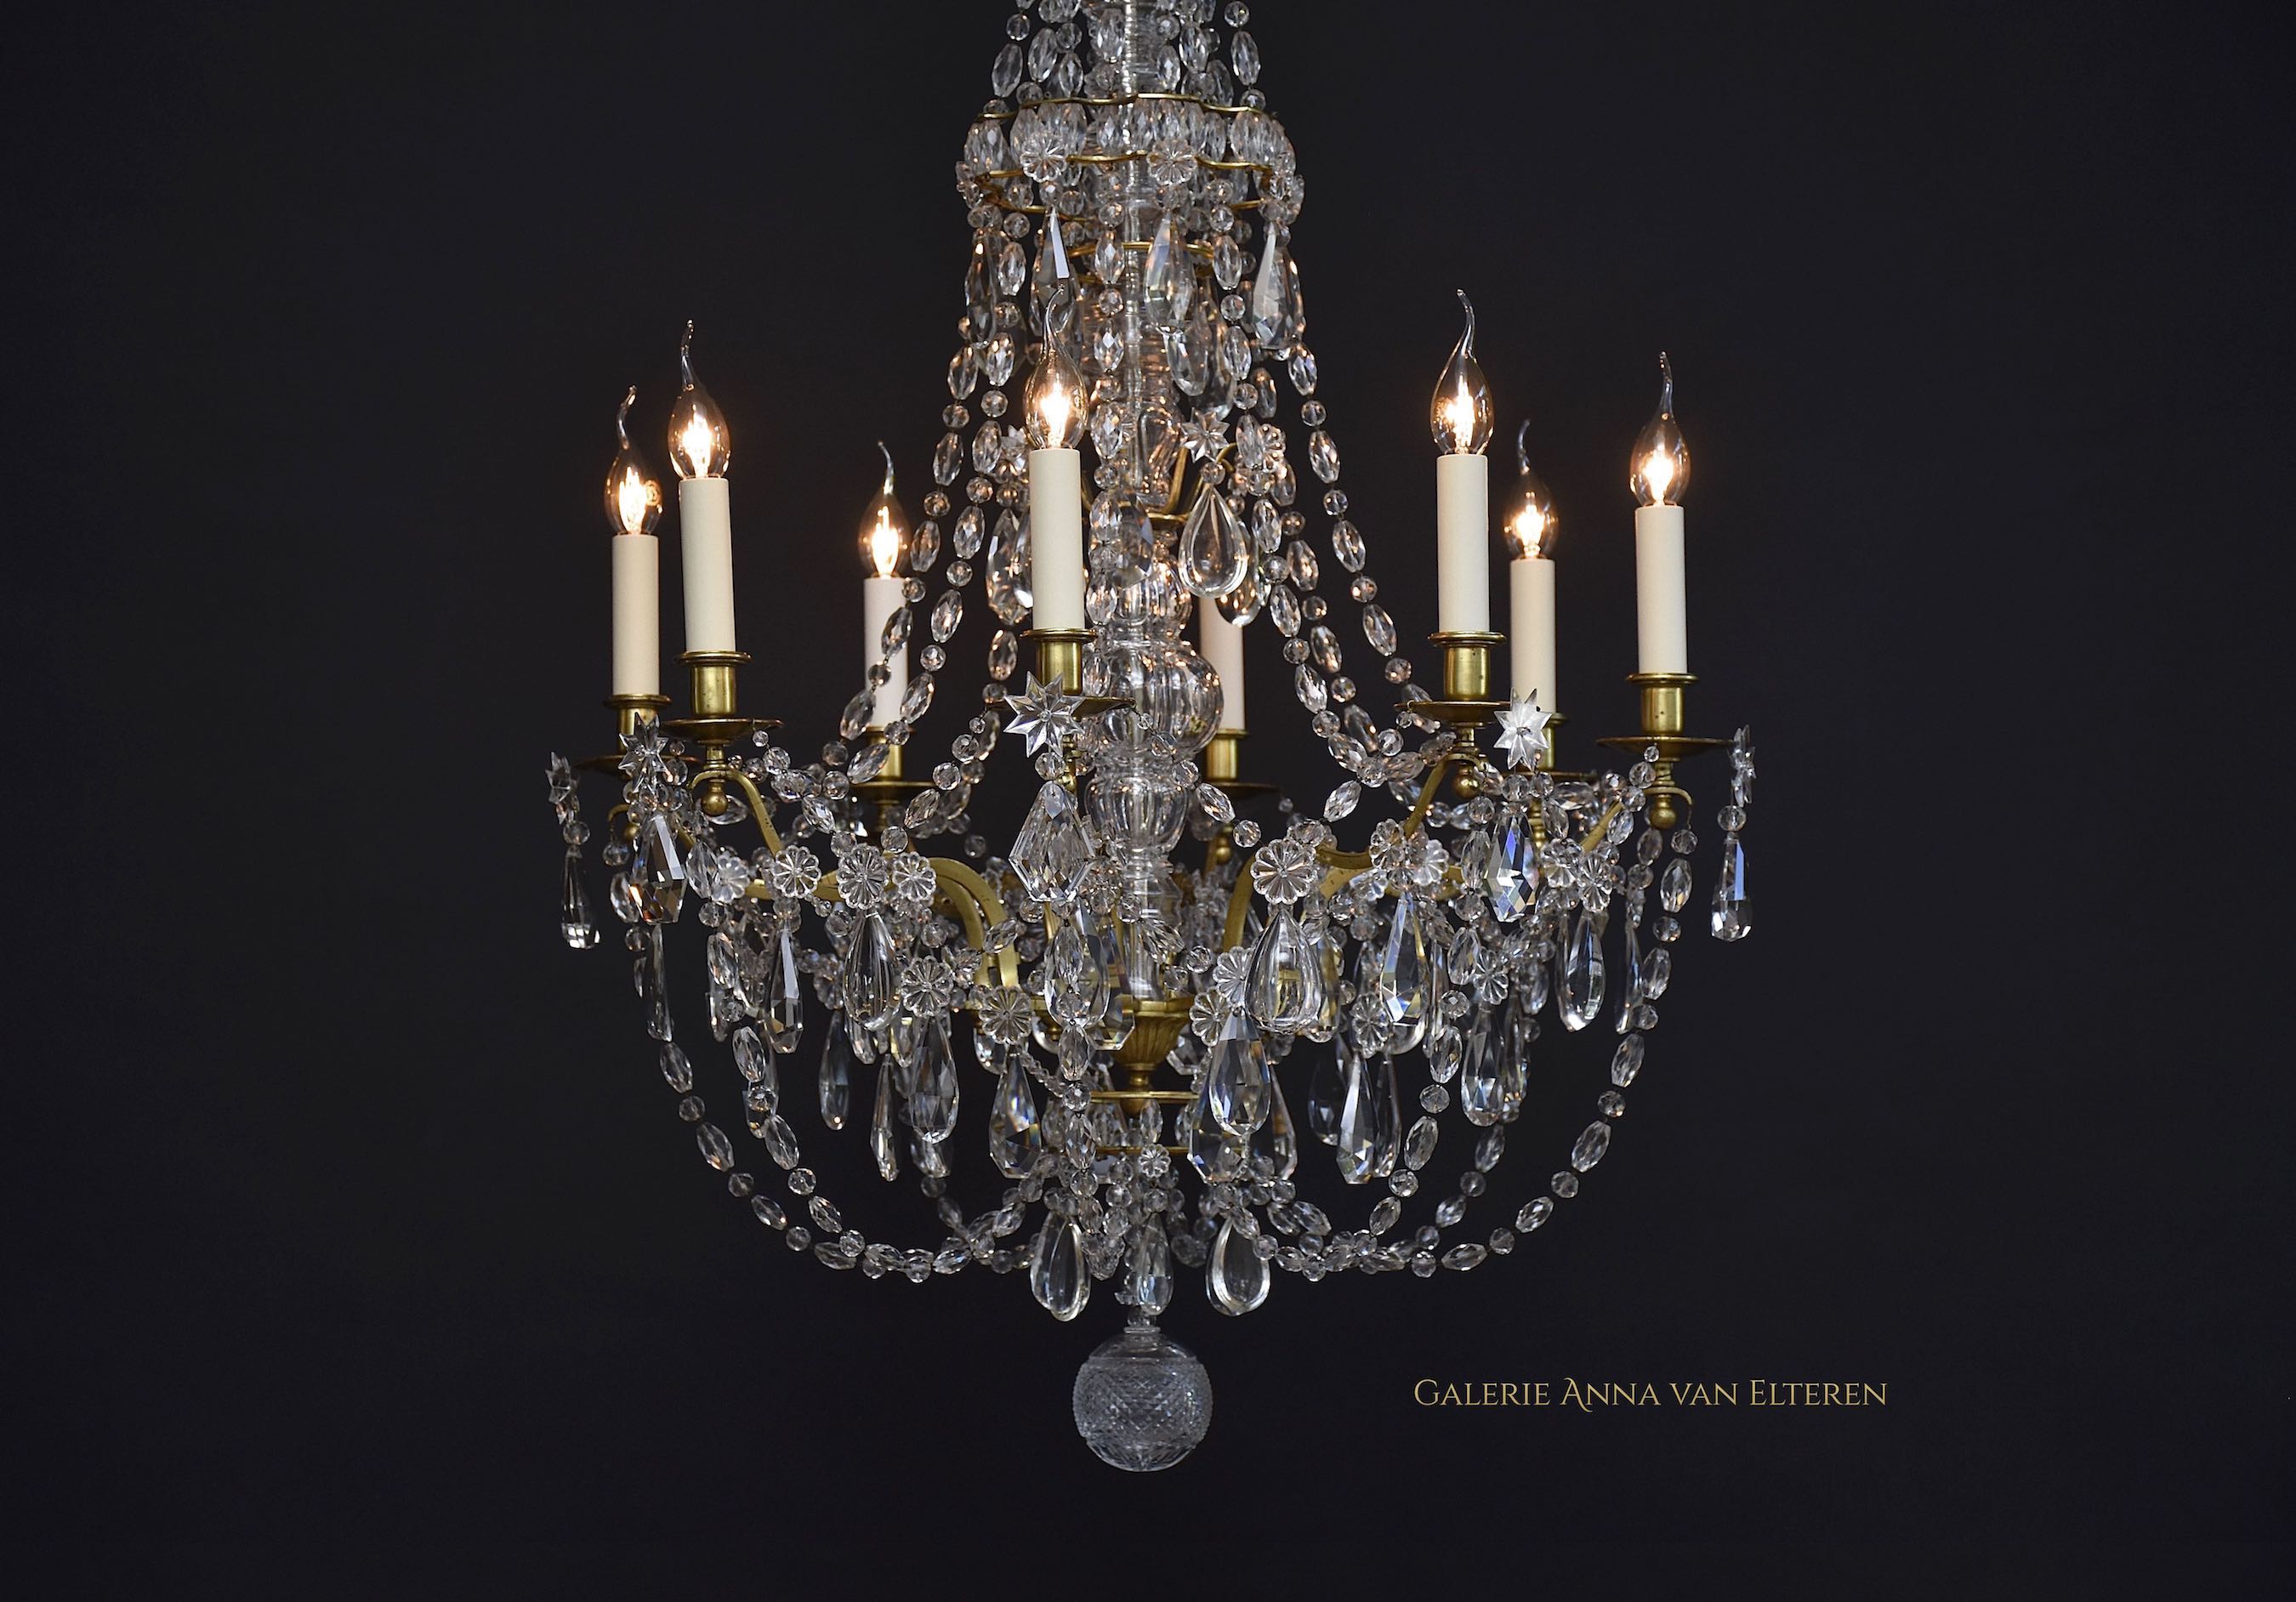 19th c. French chandelier in the style of Louis XVI